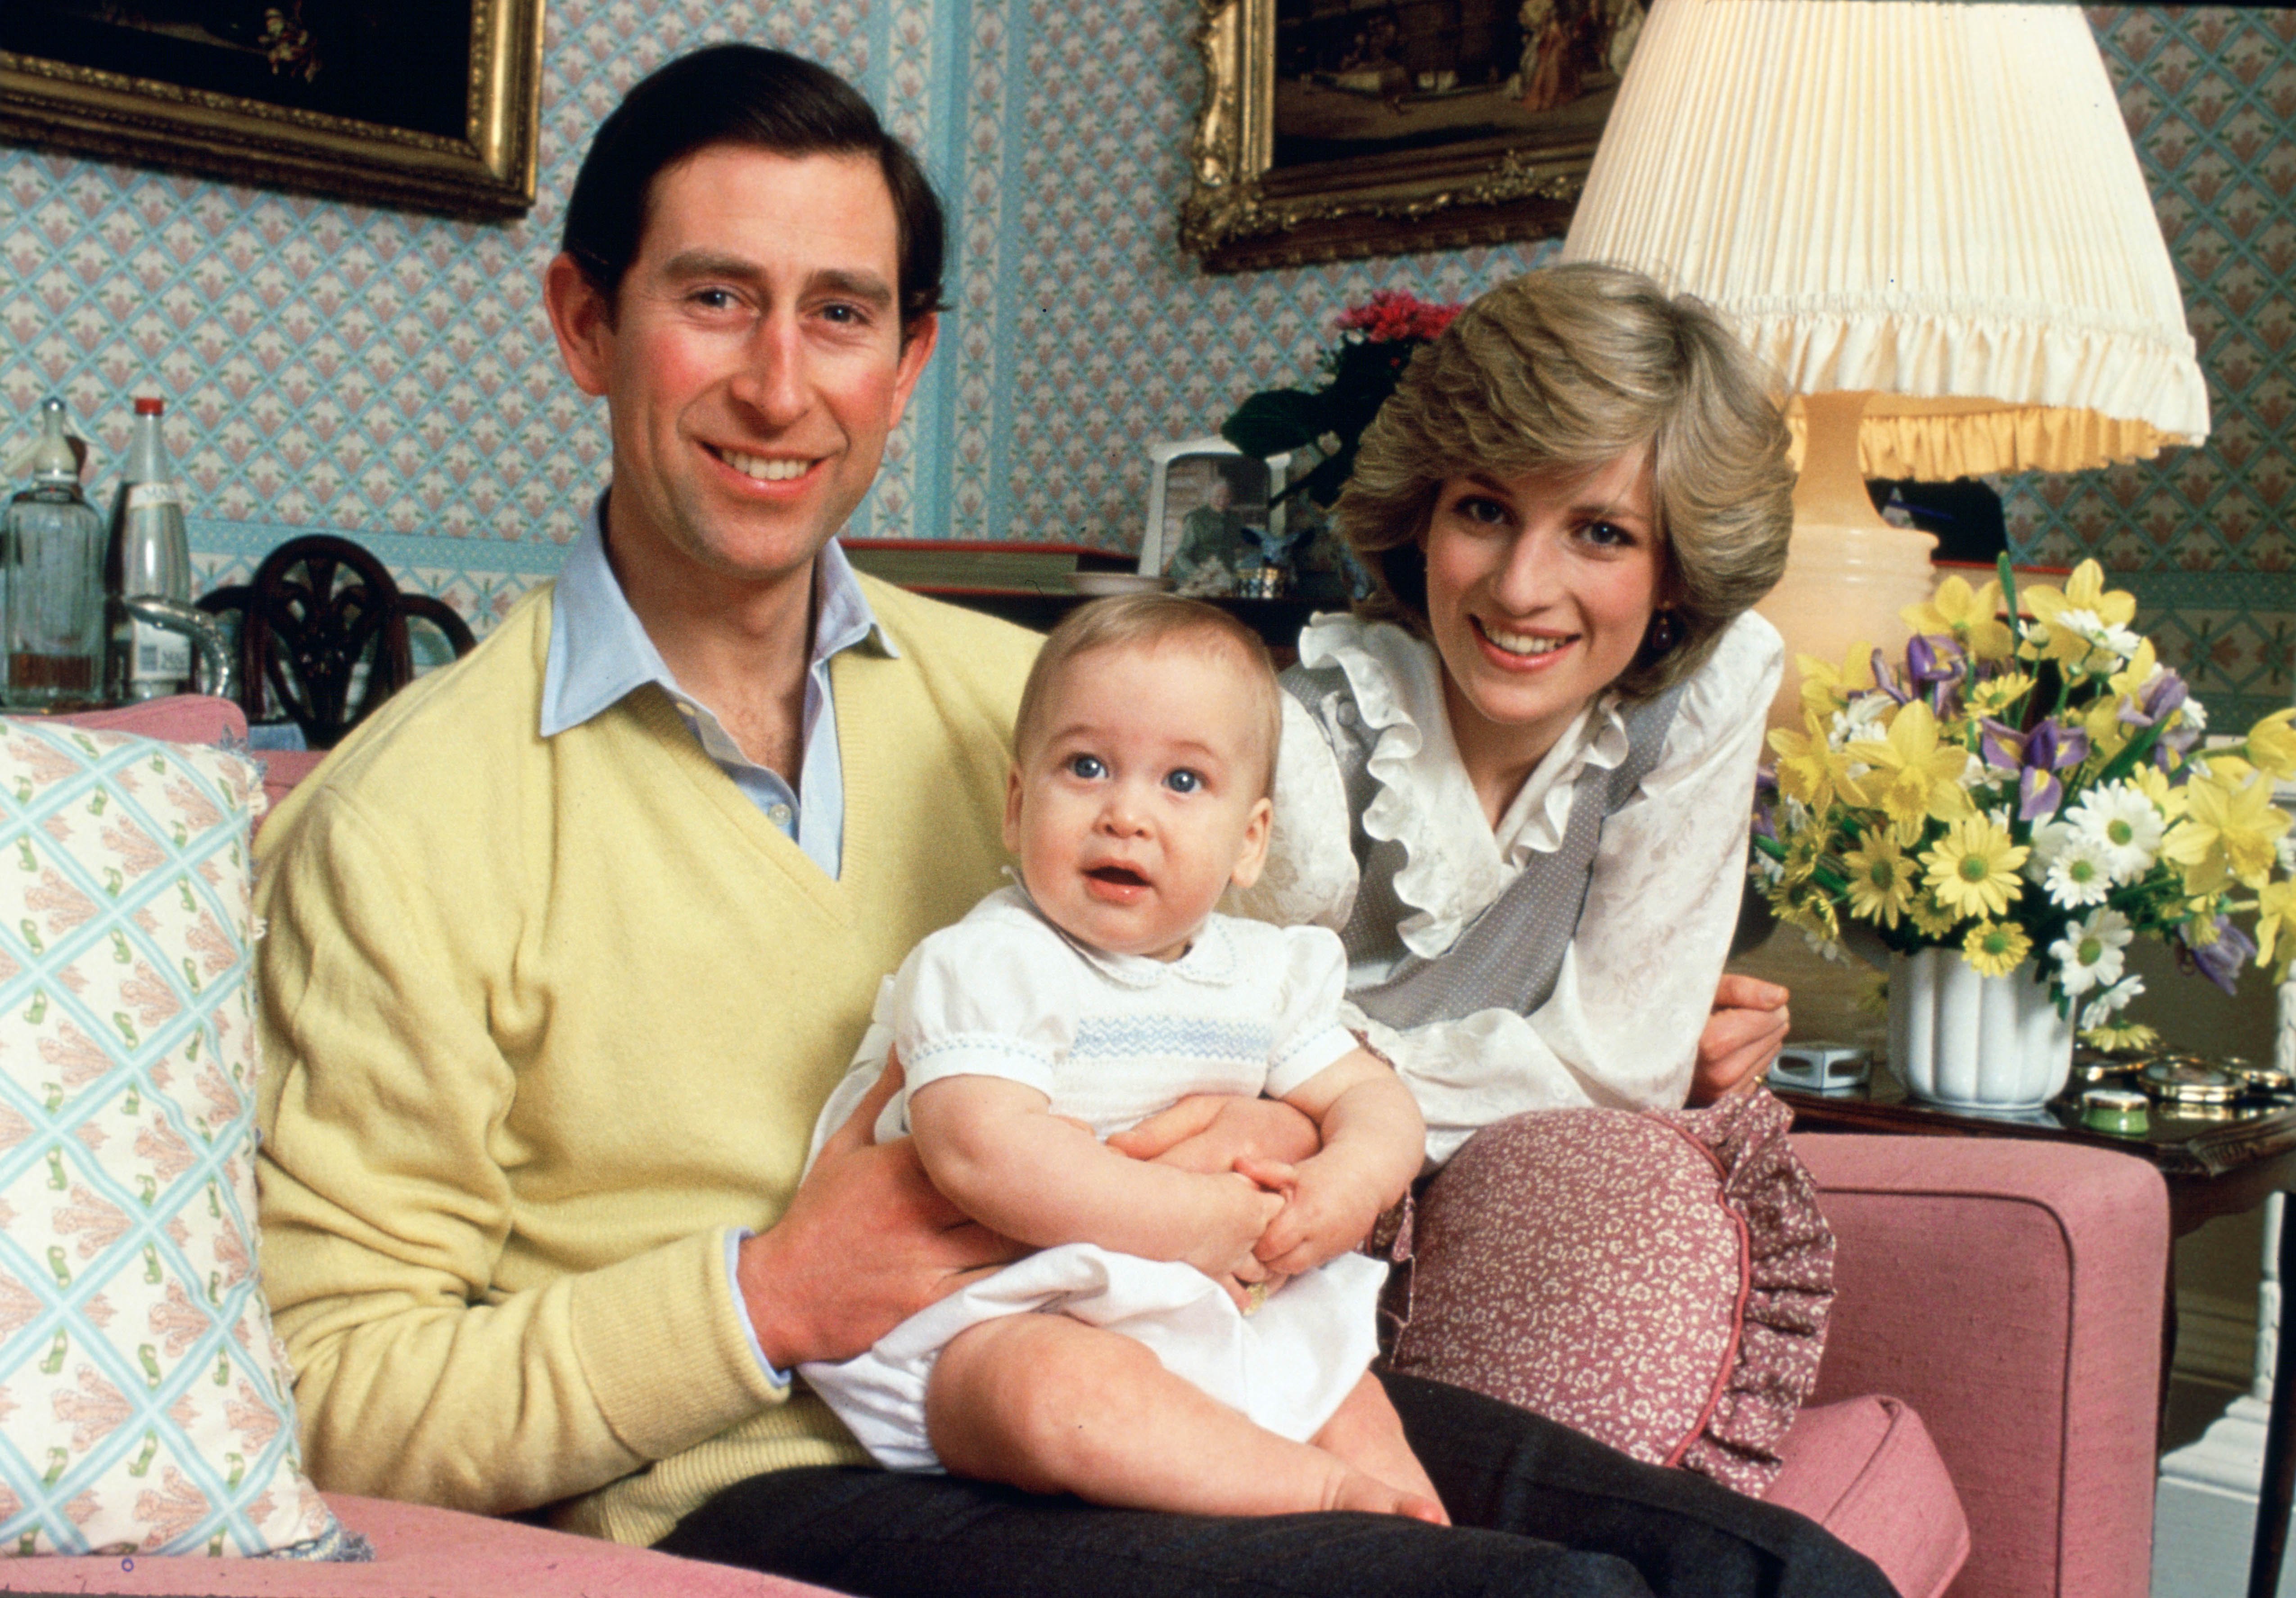  Prince Charles, Prince of Wales and Diana, Princess of Wales with their baby son, Prince William, at home in Kensington Palace. | Source: Getty Images